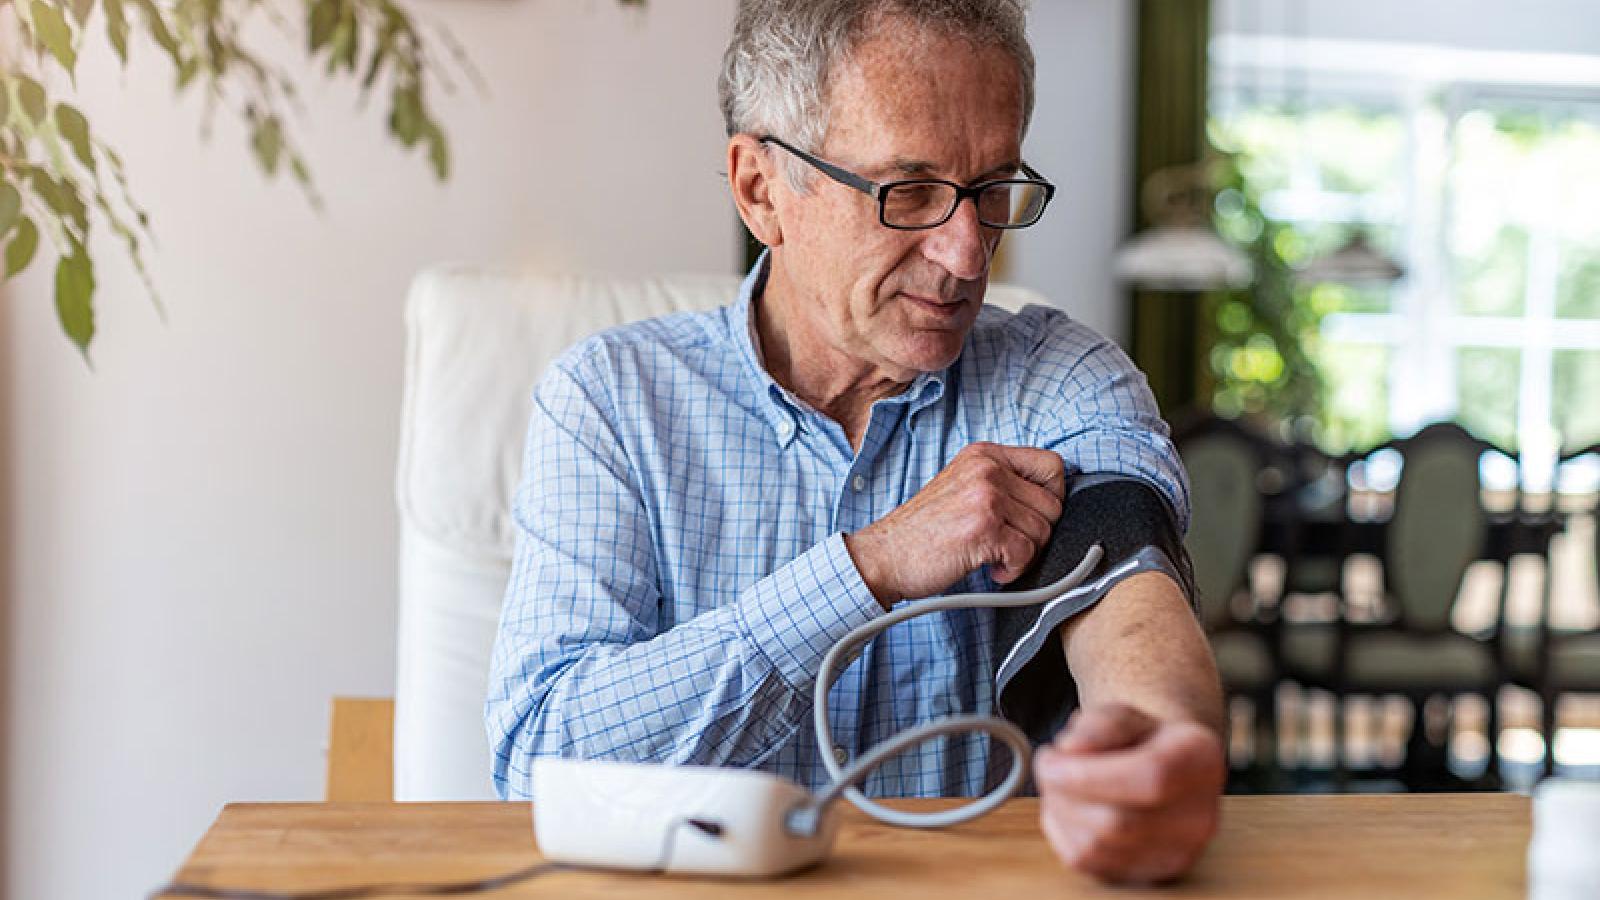 4 Tips for a Simple Guide to Checking your Blood Pressure